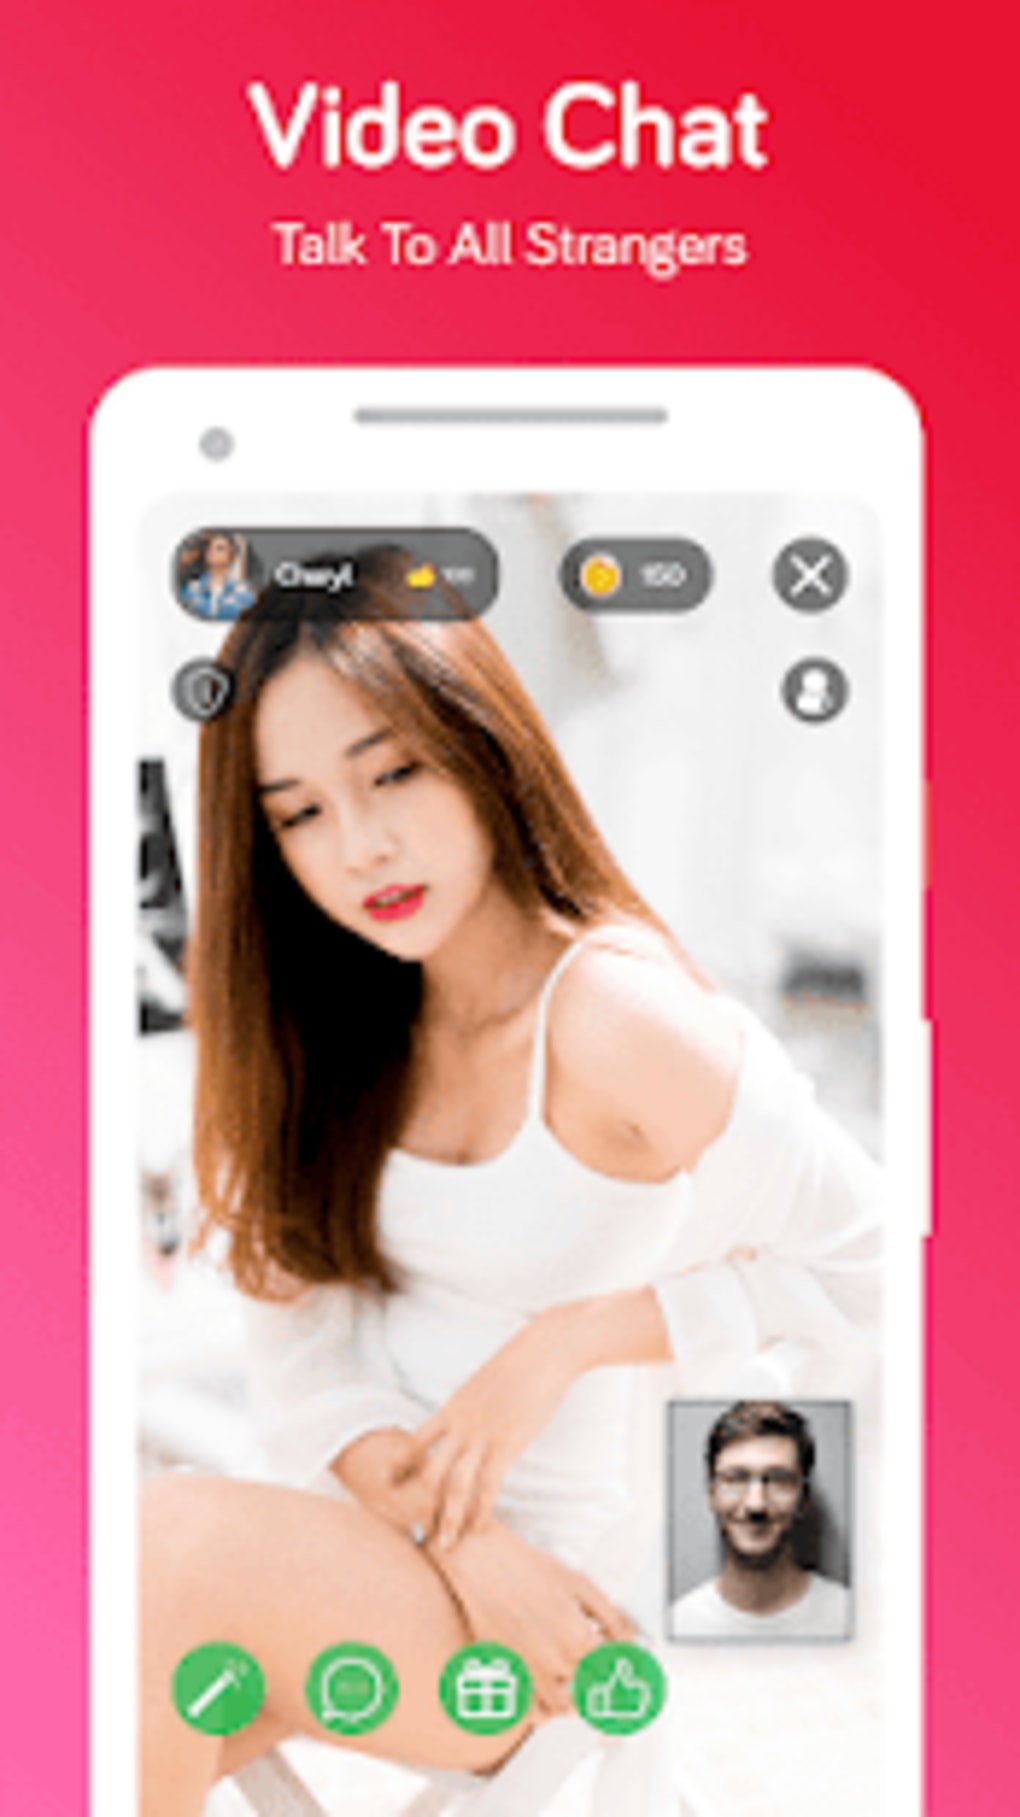 live chat random video chat app download